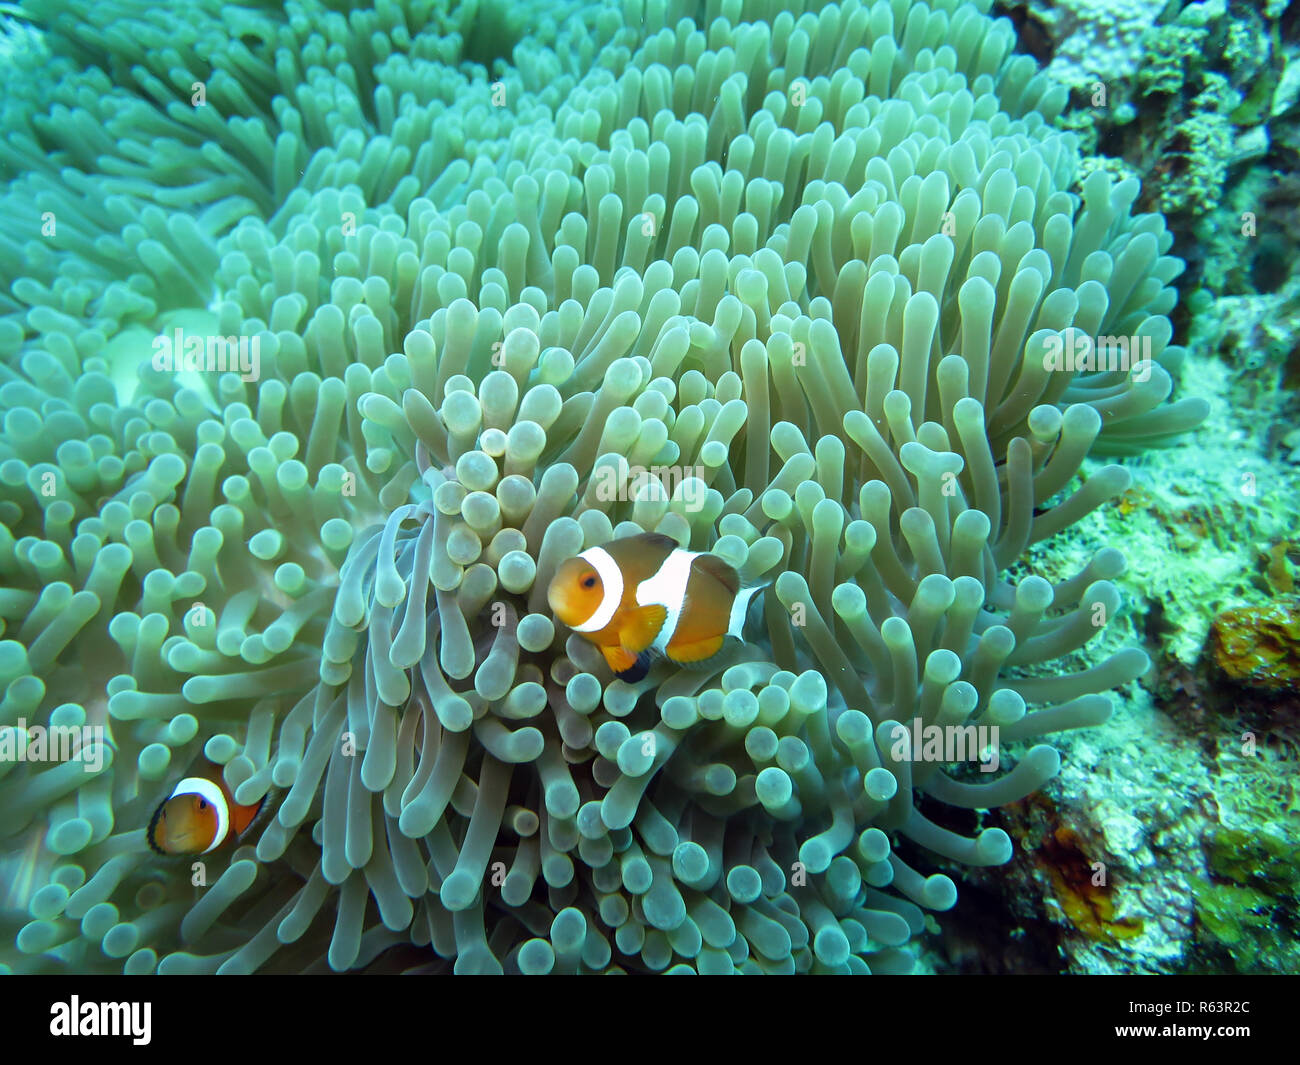 false clown - anemonefish (amphiprion ocellaris) on a magnificent anemone or mauritius anemone (heteractis magnifica),pintuyan,panaon island,southern leyte,philippines Stock Photo